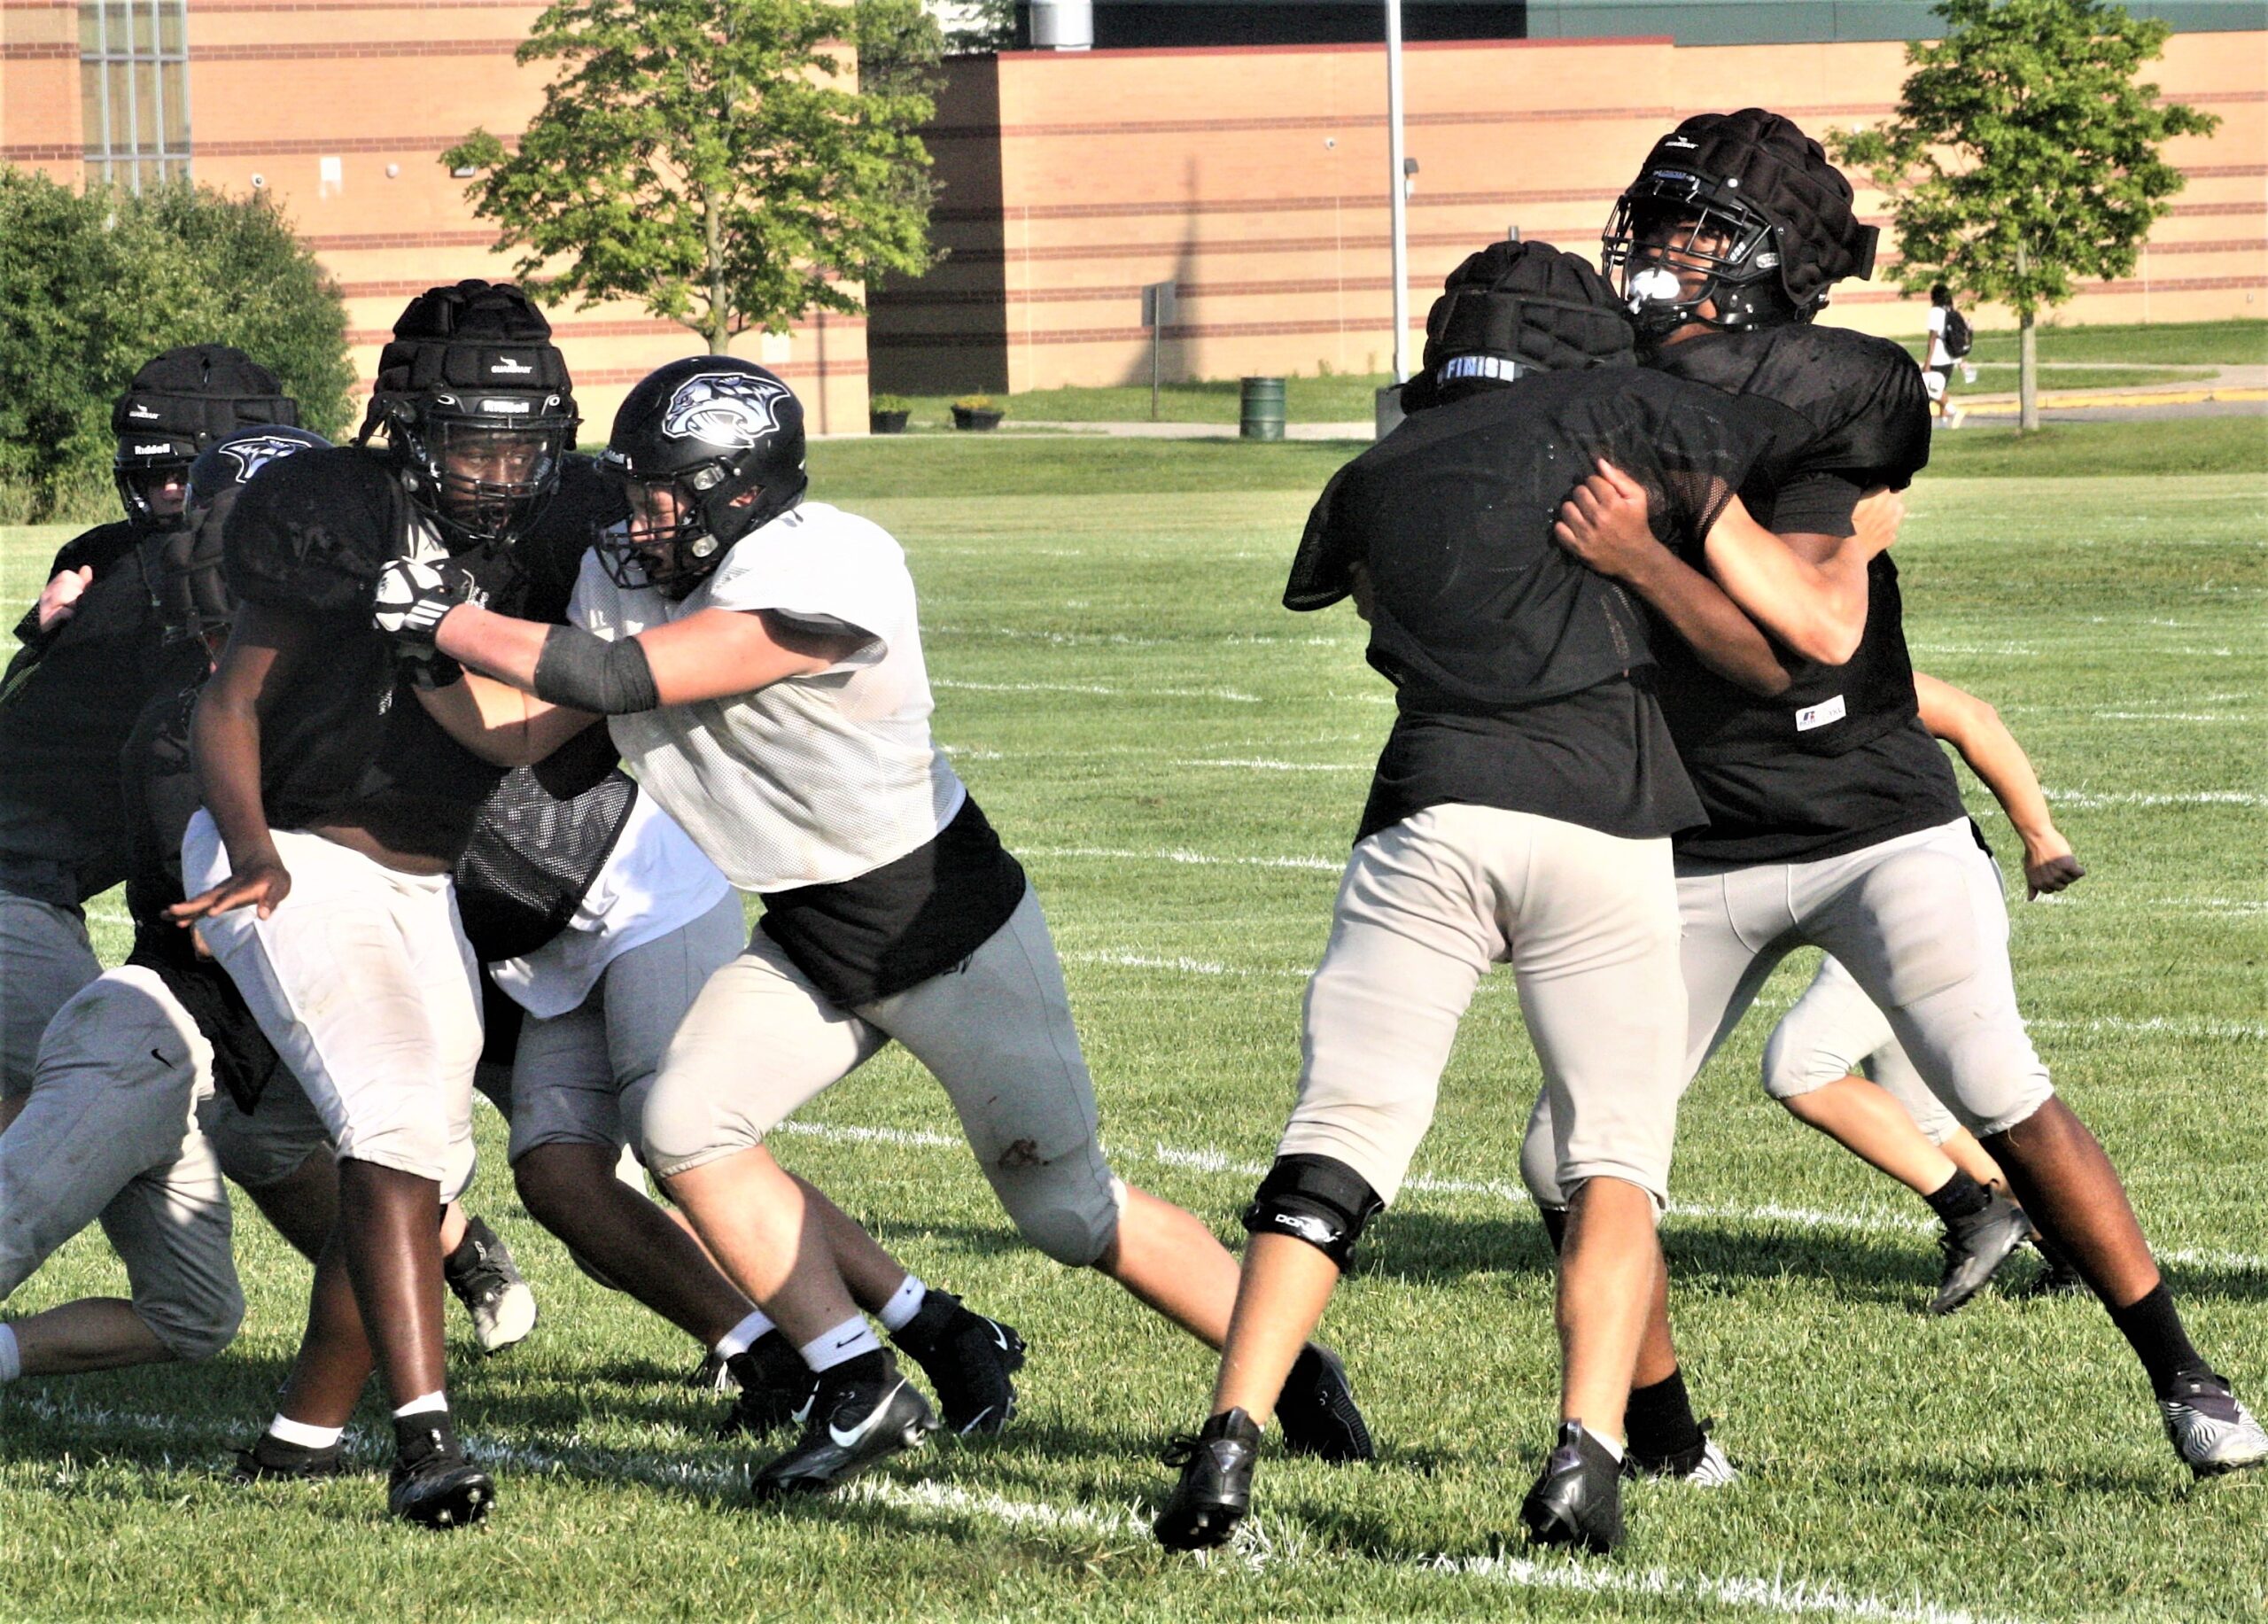 Its large and mobile offensive line will be an asset for Plymouth this season